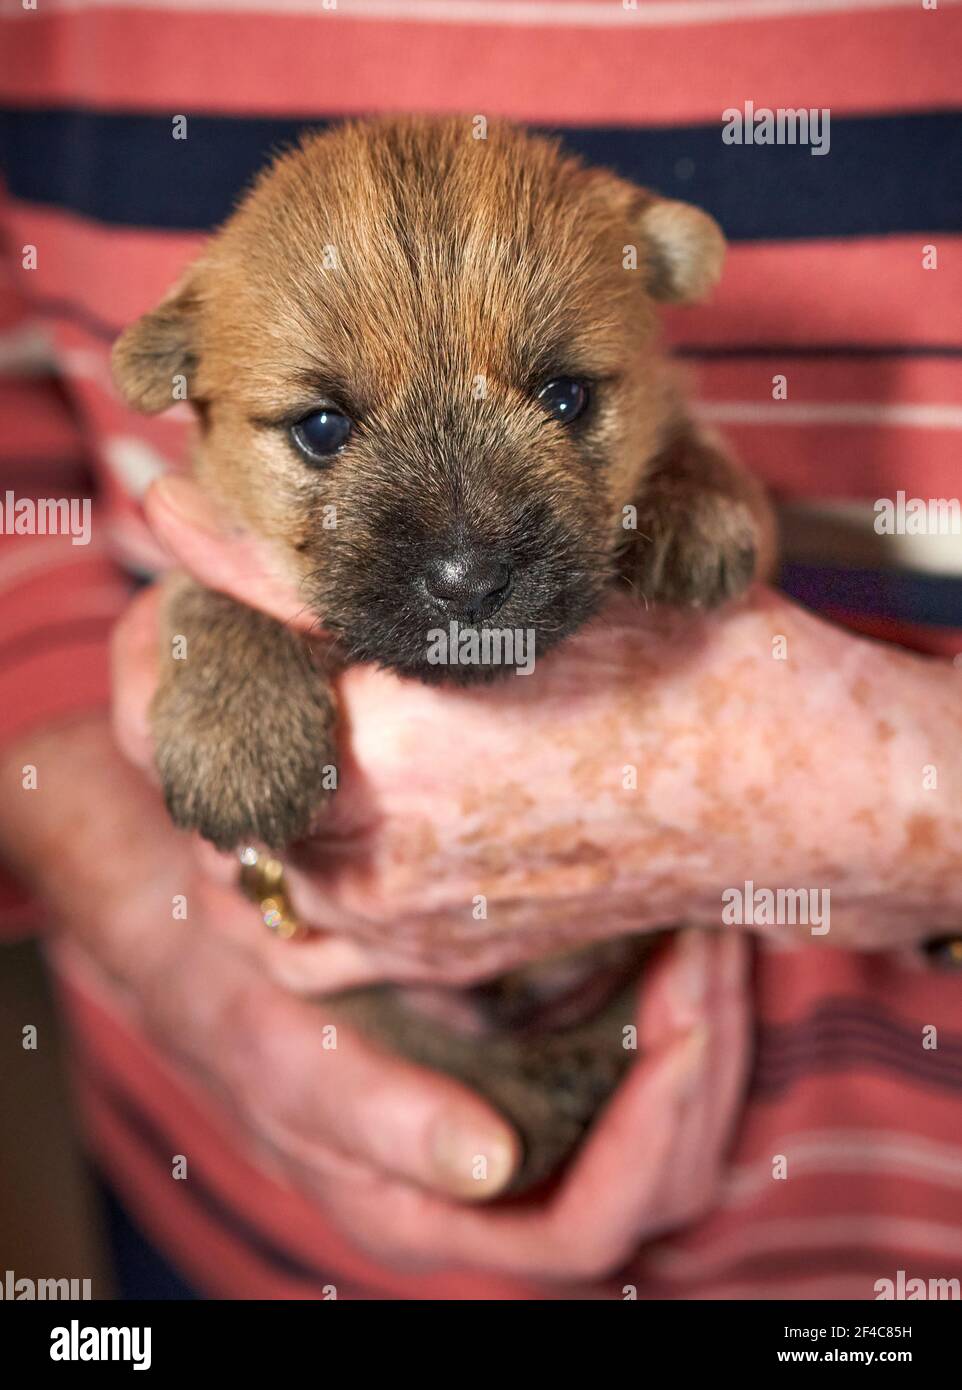 An elderly lady holding a Cairn Terrier puppy in her hands in her living room at Christmas. Stock Photo